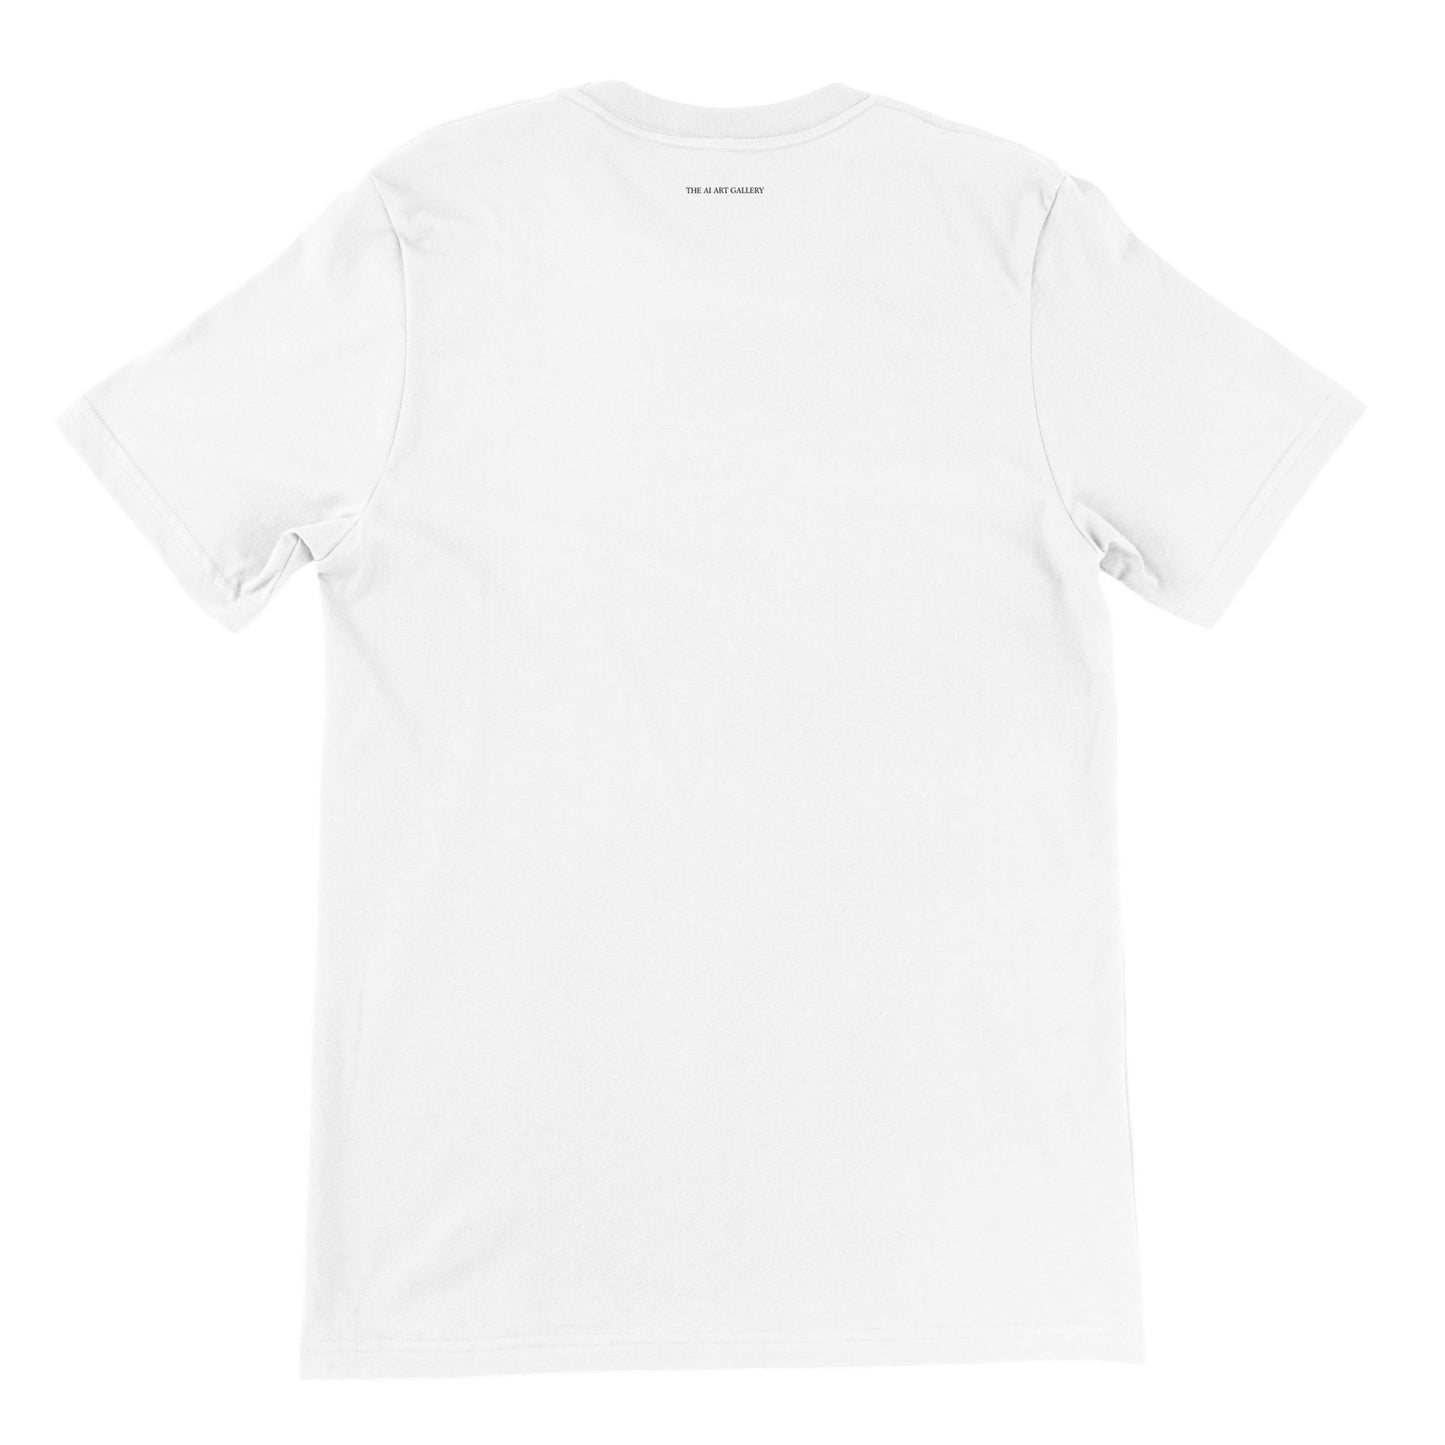 fumigans fratribus / SS23 / T-shirt / white